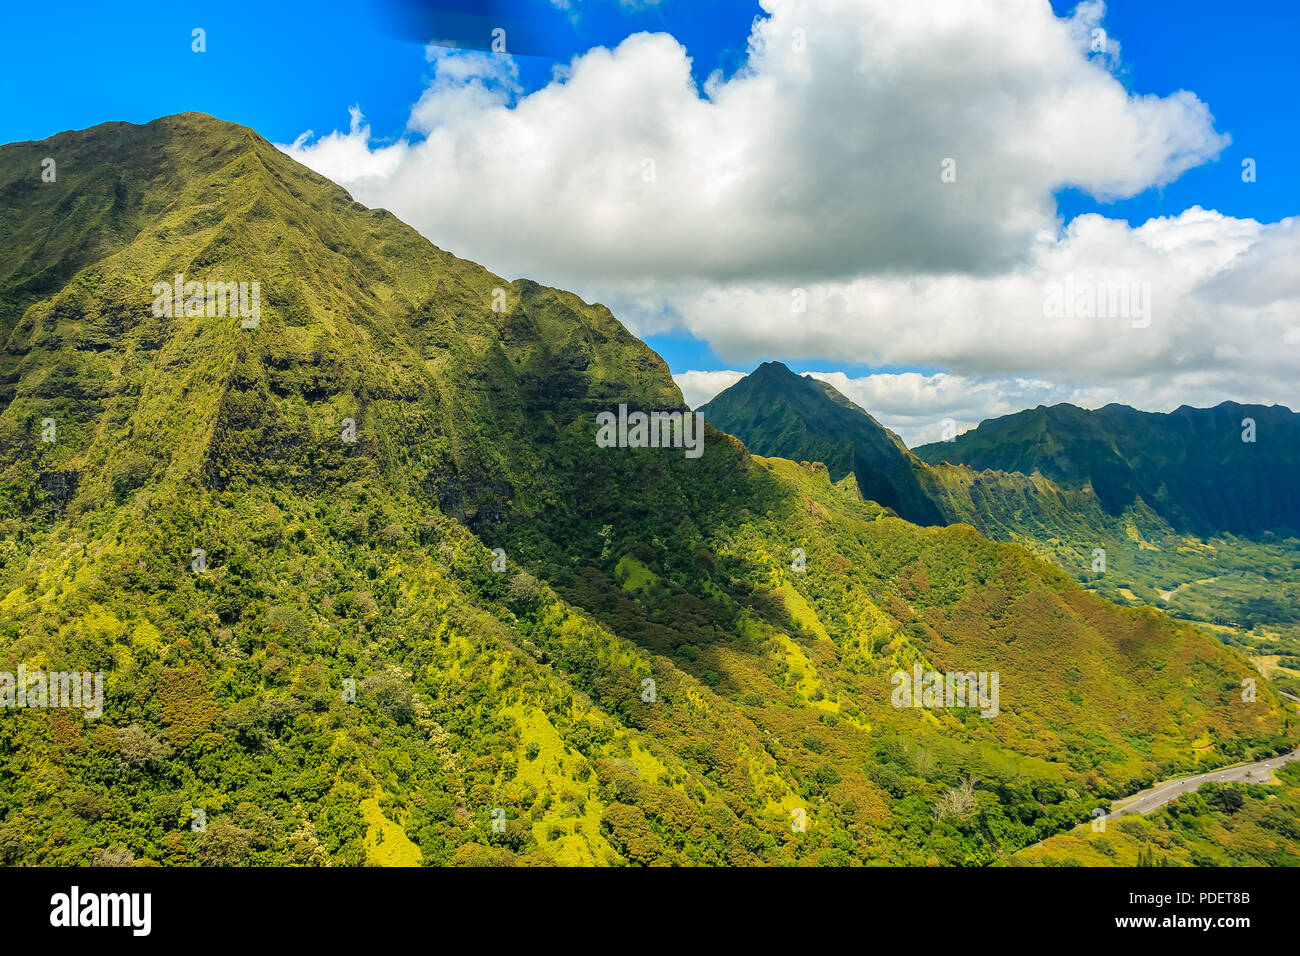 Aerial view mountain ridge line in Honolulu Hawaii from a helicopter Stock Photo